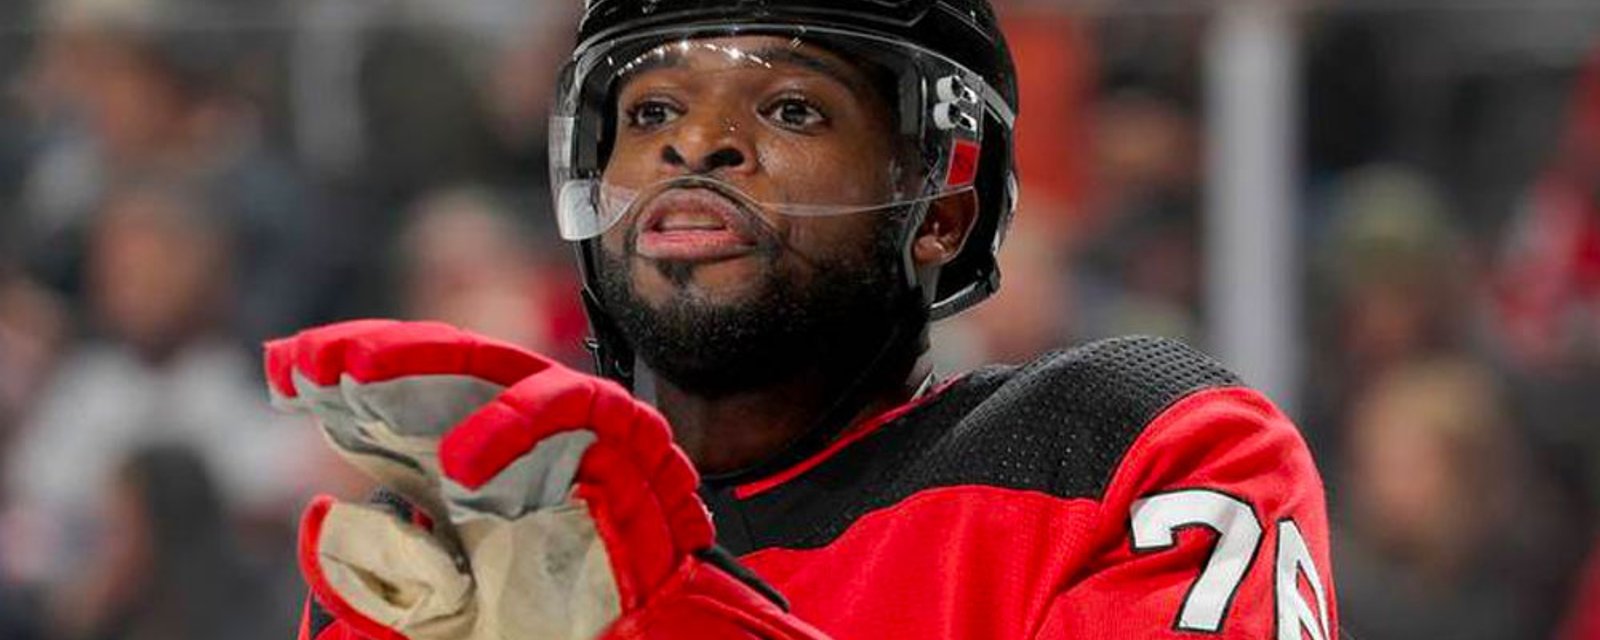 The New York Post slams P.K. Subban with severe criticism! 